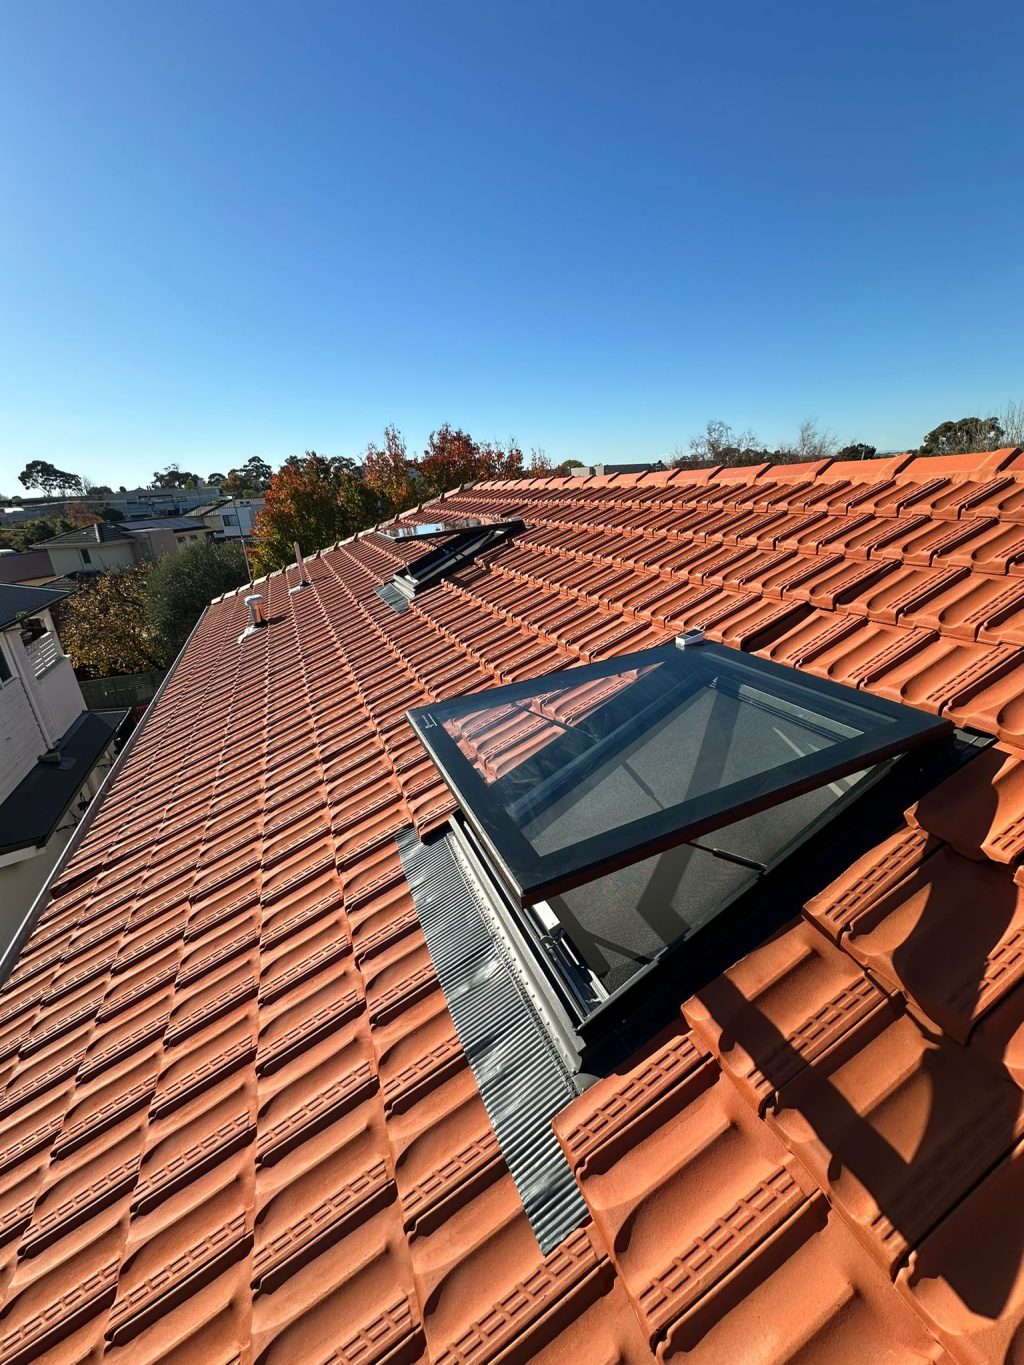 Operable skylight on a tiled roof